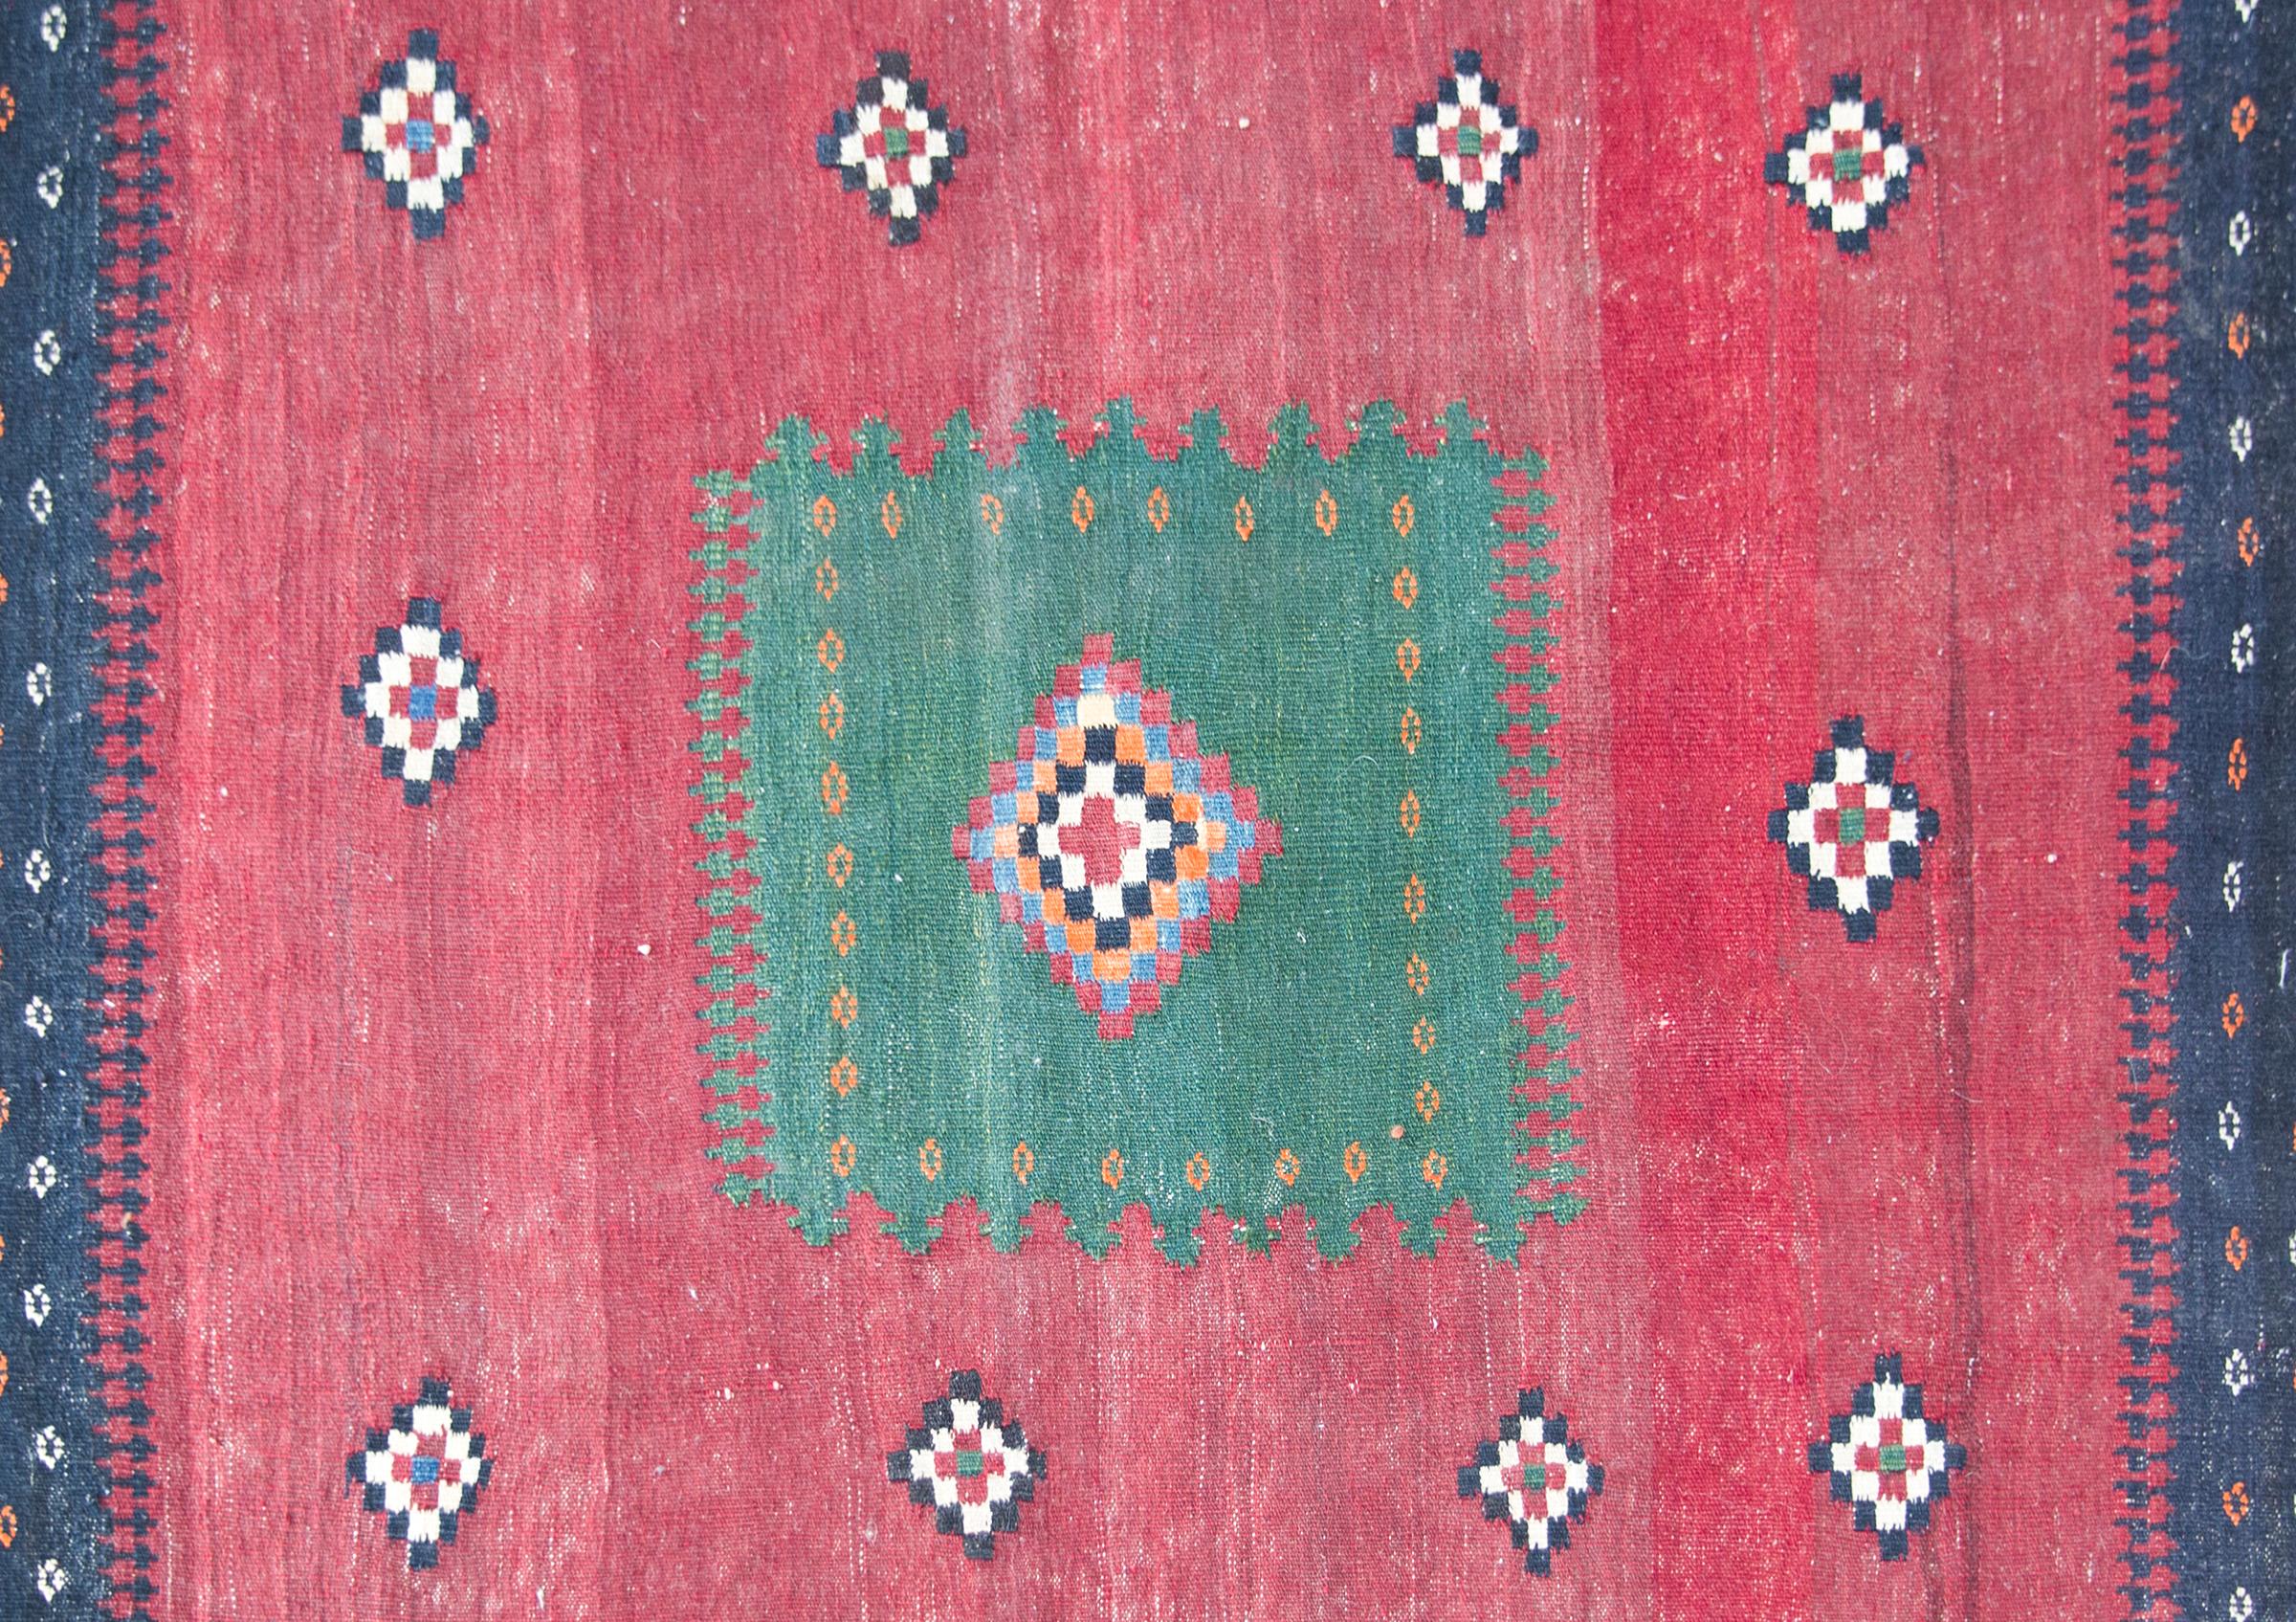 A beautiful early 20th century Persian Afshar Sofreh rug with a geometric pattern with a central multi-colored diamond medallion on a green square living amidst a field of stylized flowers against an abrash crimson background. The border is